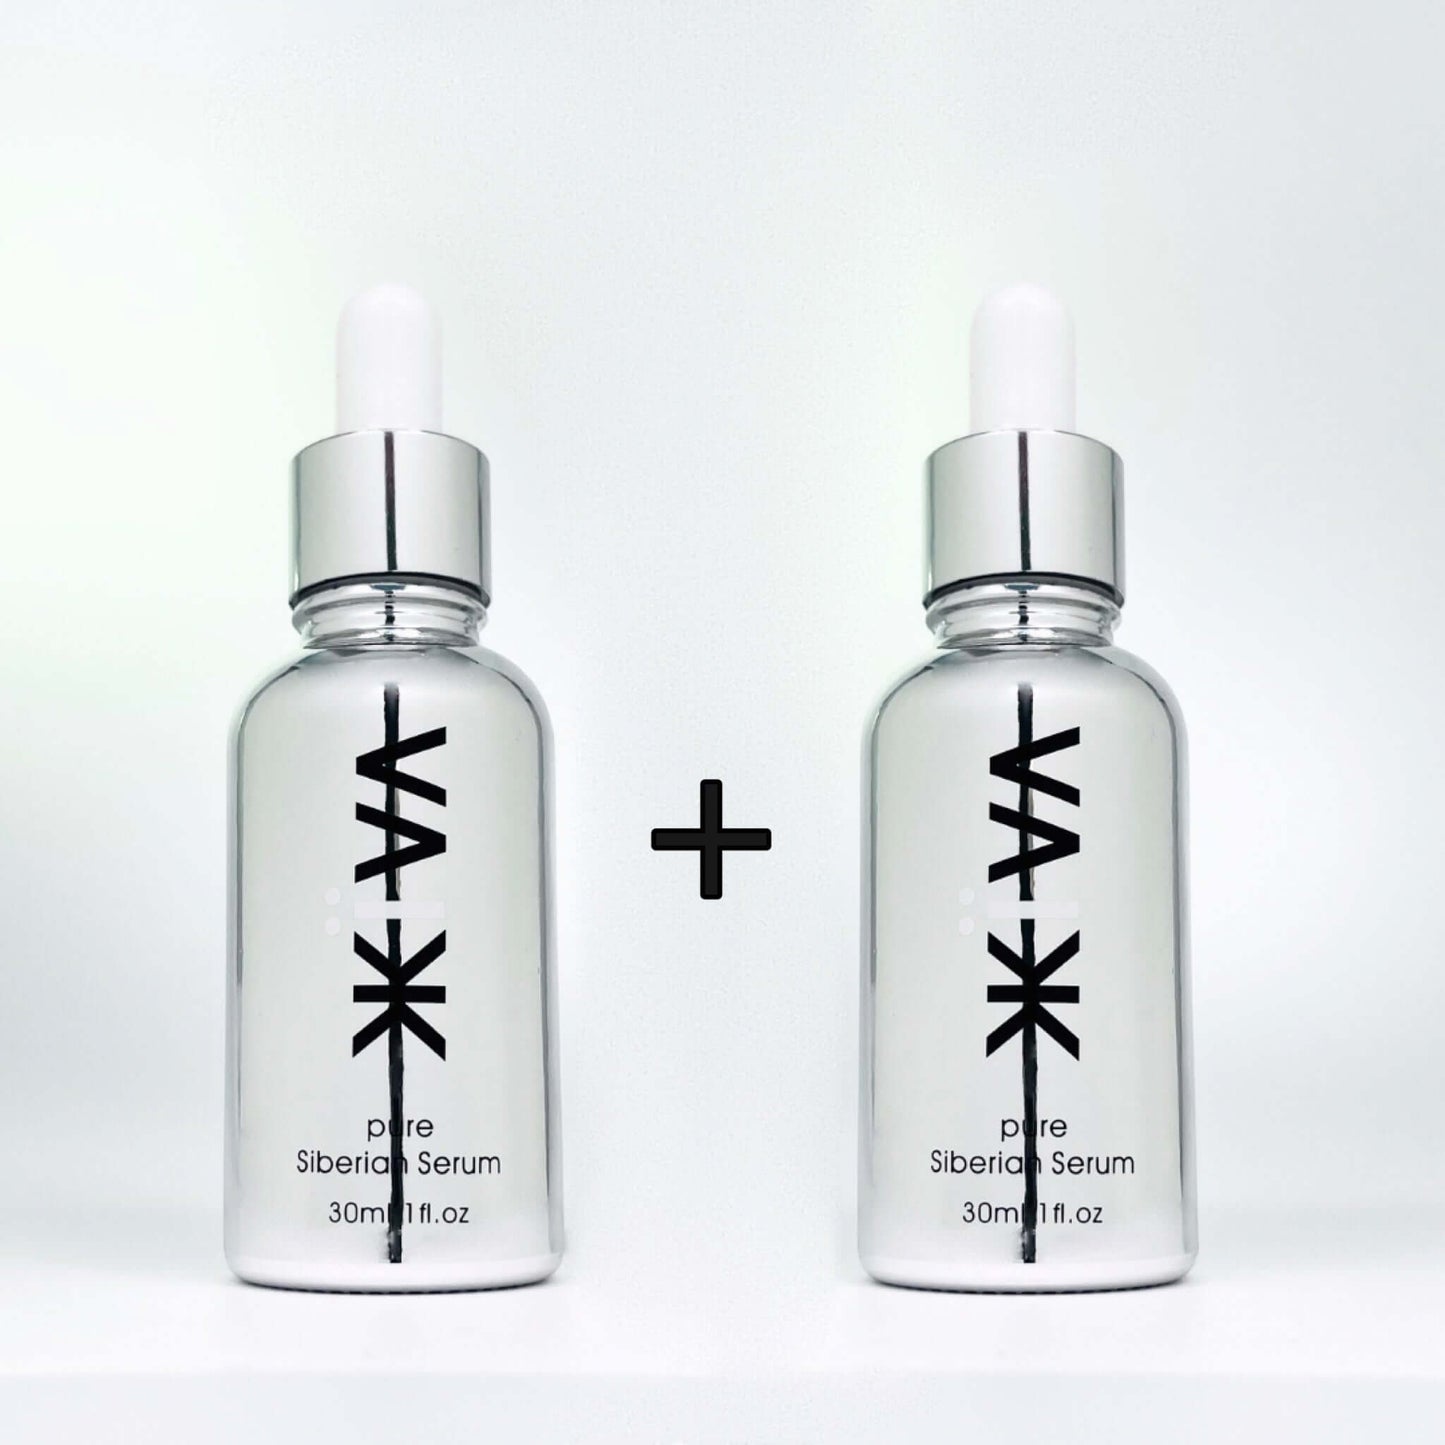 Zhiiva skincare is a pure, organic, chemistry-free, and all-natural serum from the Siberian Taiga Forest. We plant one tree for every bottle of Zhiiva sold.